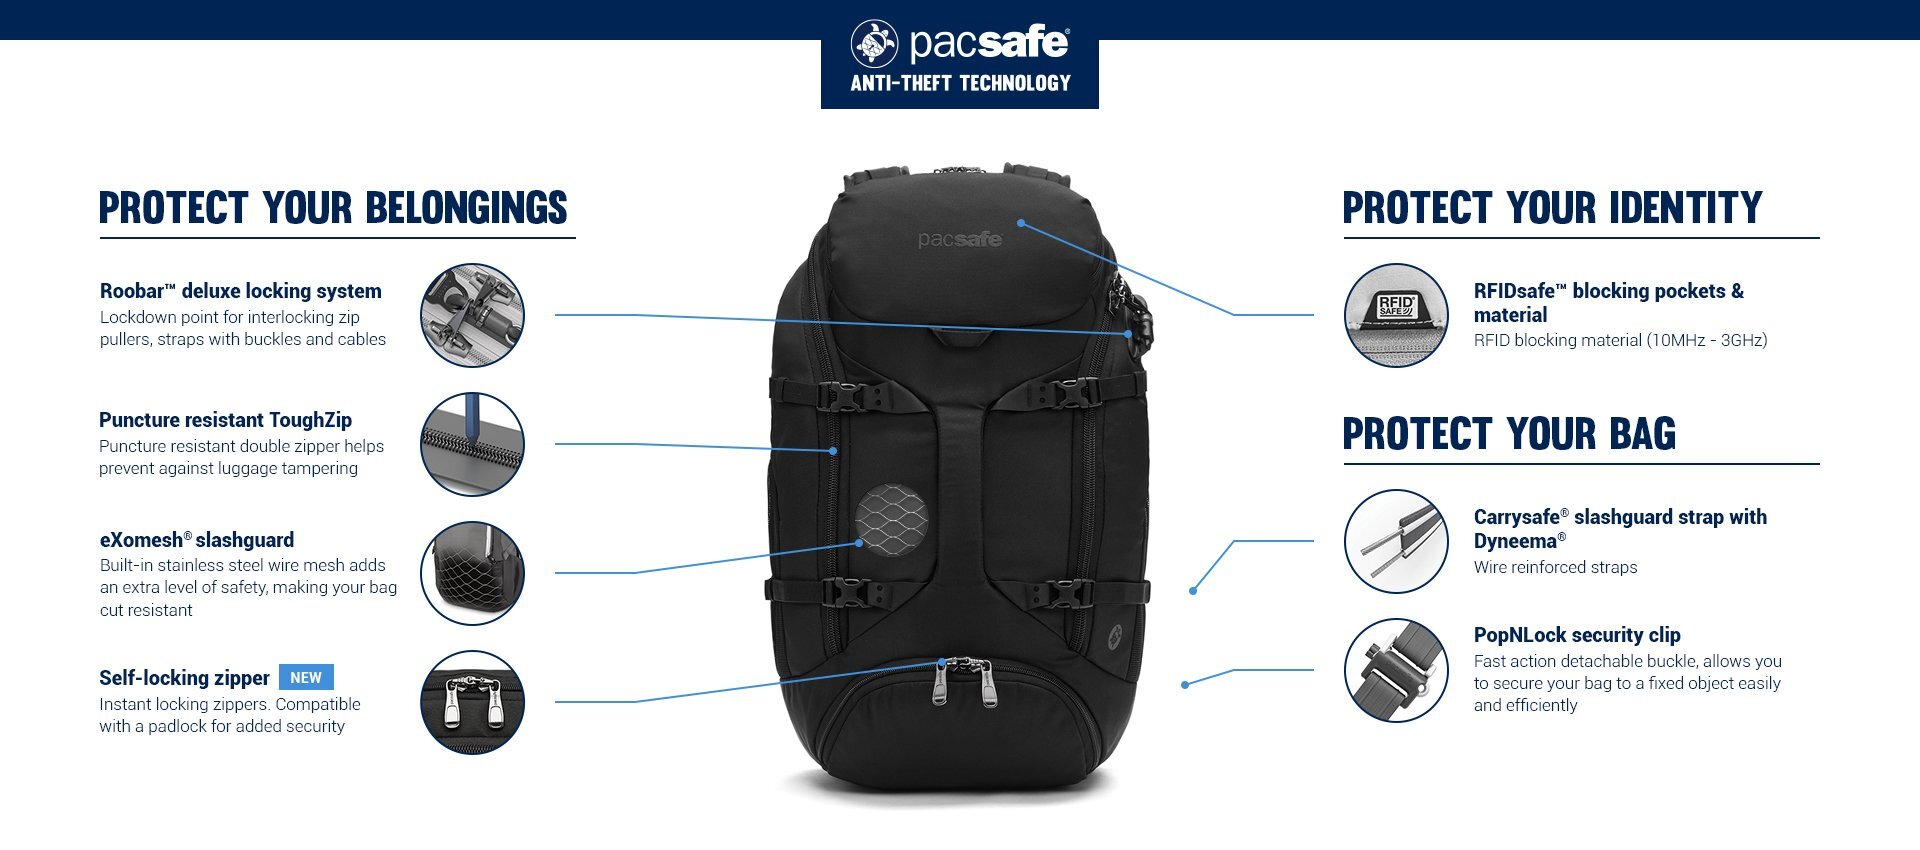 Cabin Max - The new Perth Anti-Theft Cabin Backpack features a